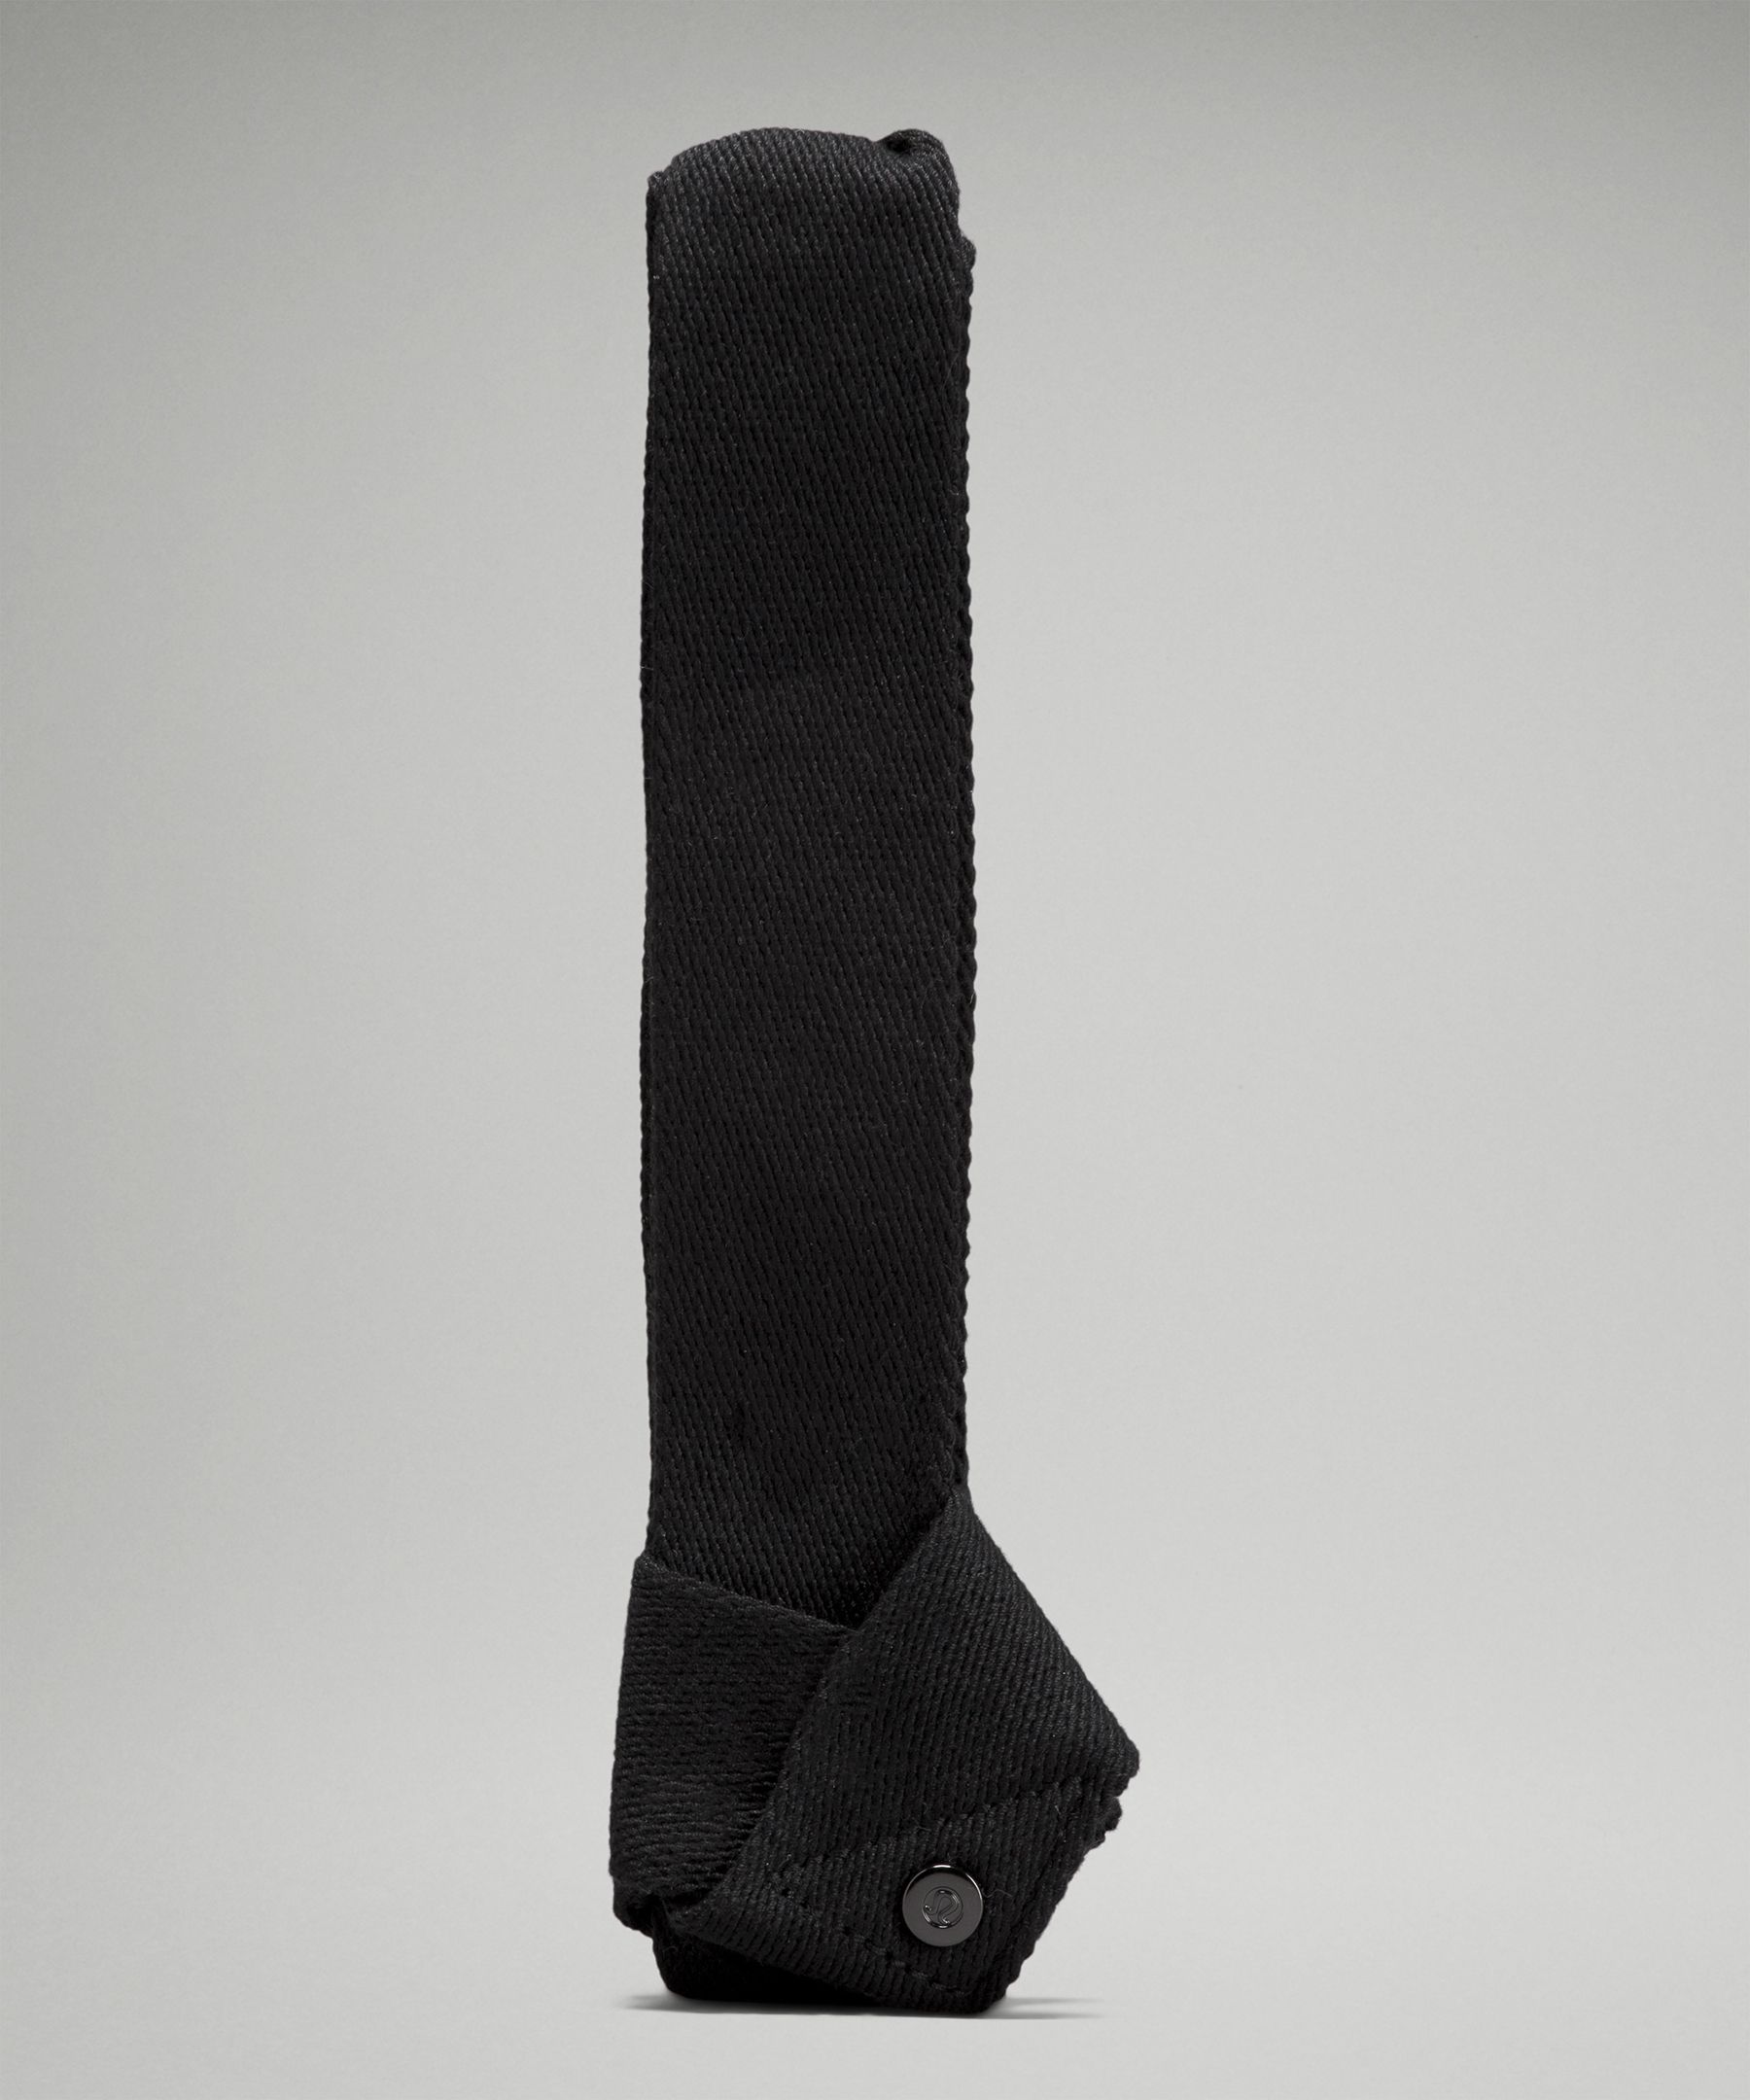 Clearance Sale Lululemon Equipment - Black Stow and Flow Mat Strap